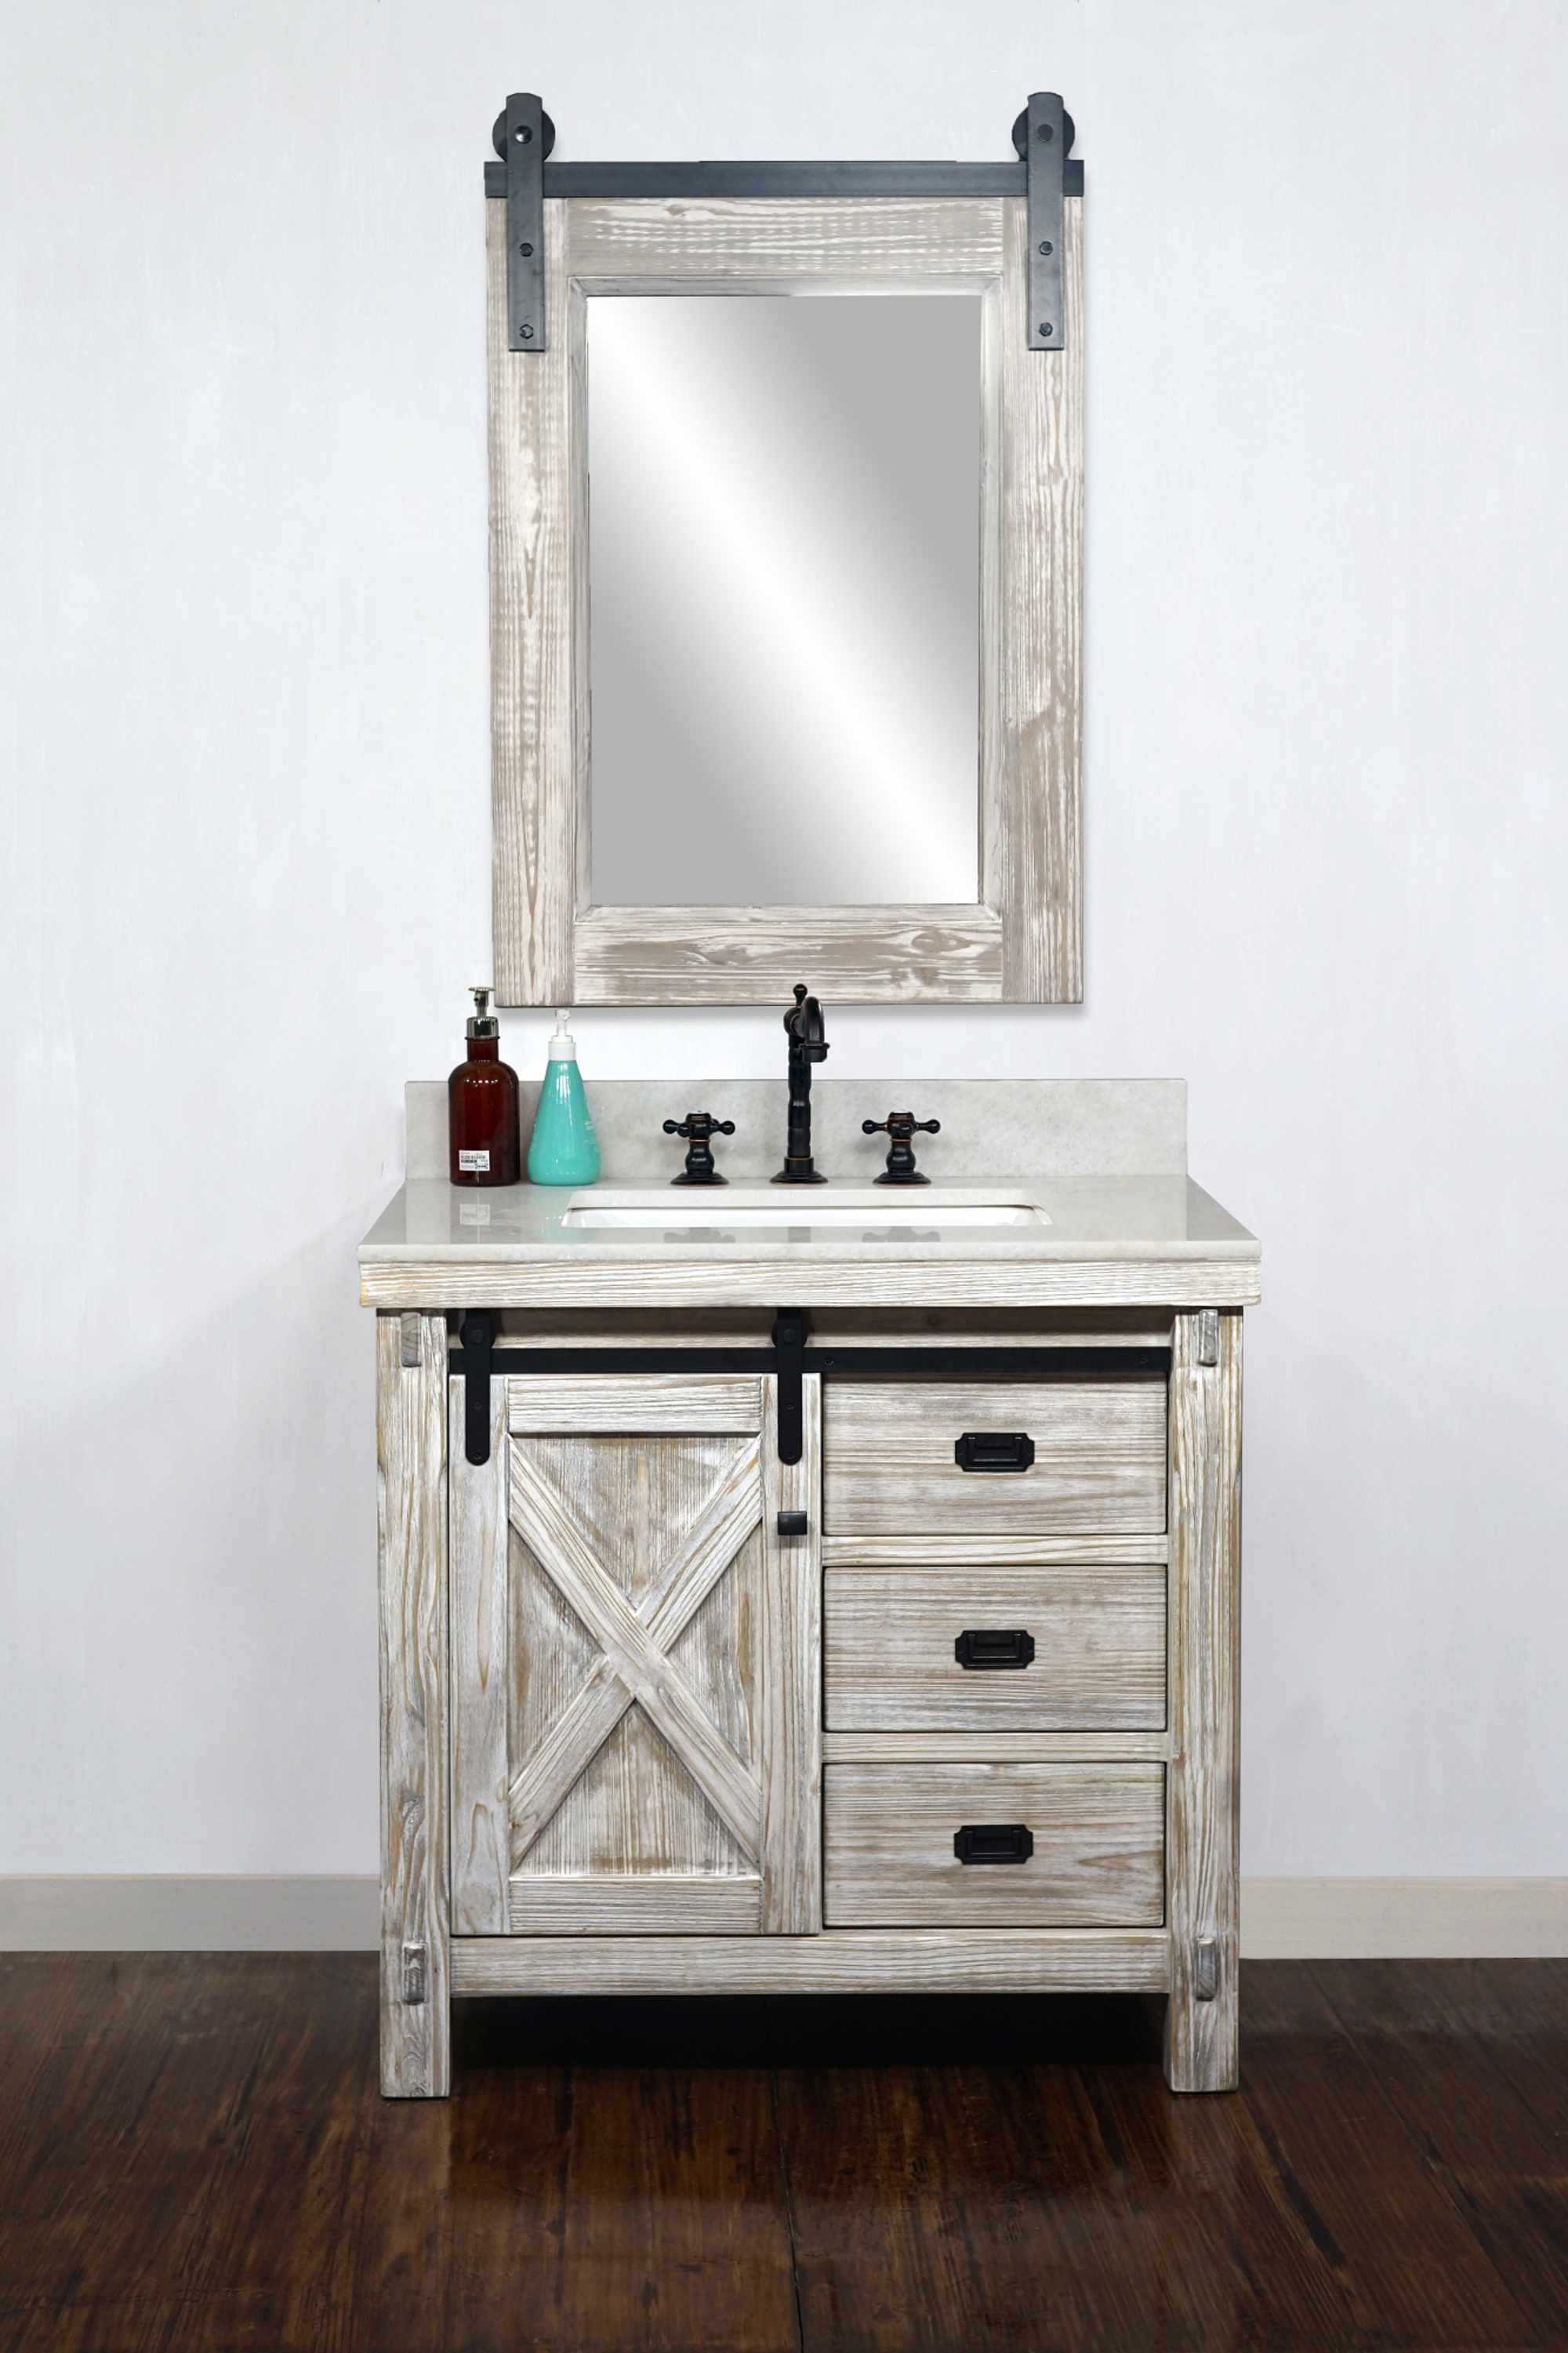 36" Rustic Solid Fir Barn Door Style Single Sink Vanity in White Washed - No Faucet with Countertop Options